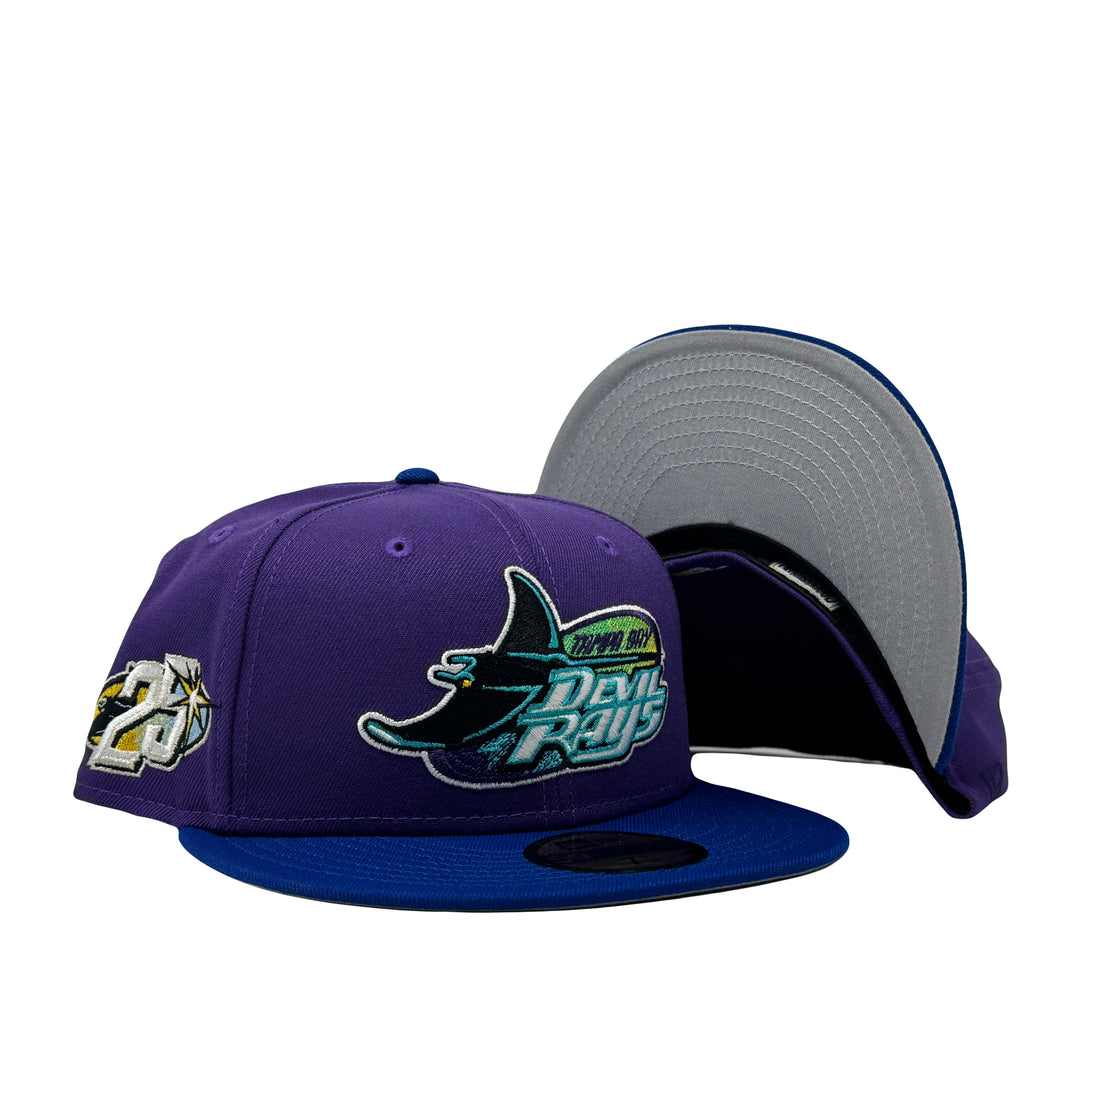 Tampa Bay Devil Rays 25th Anniversary Sparkling Grape Royal New Era Fitted Hat